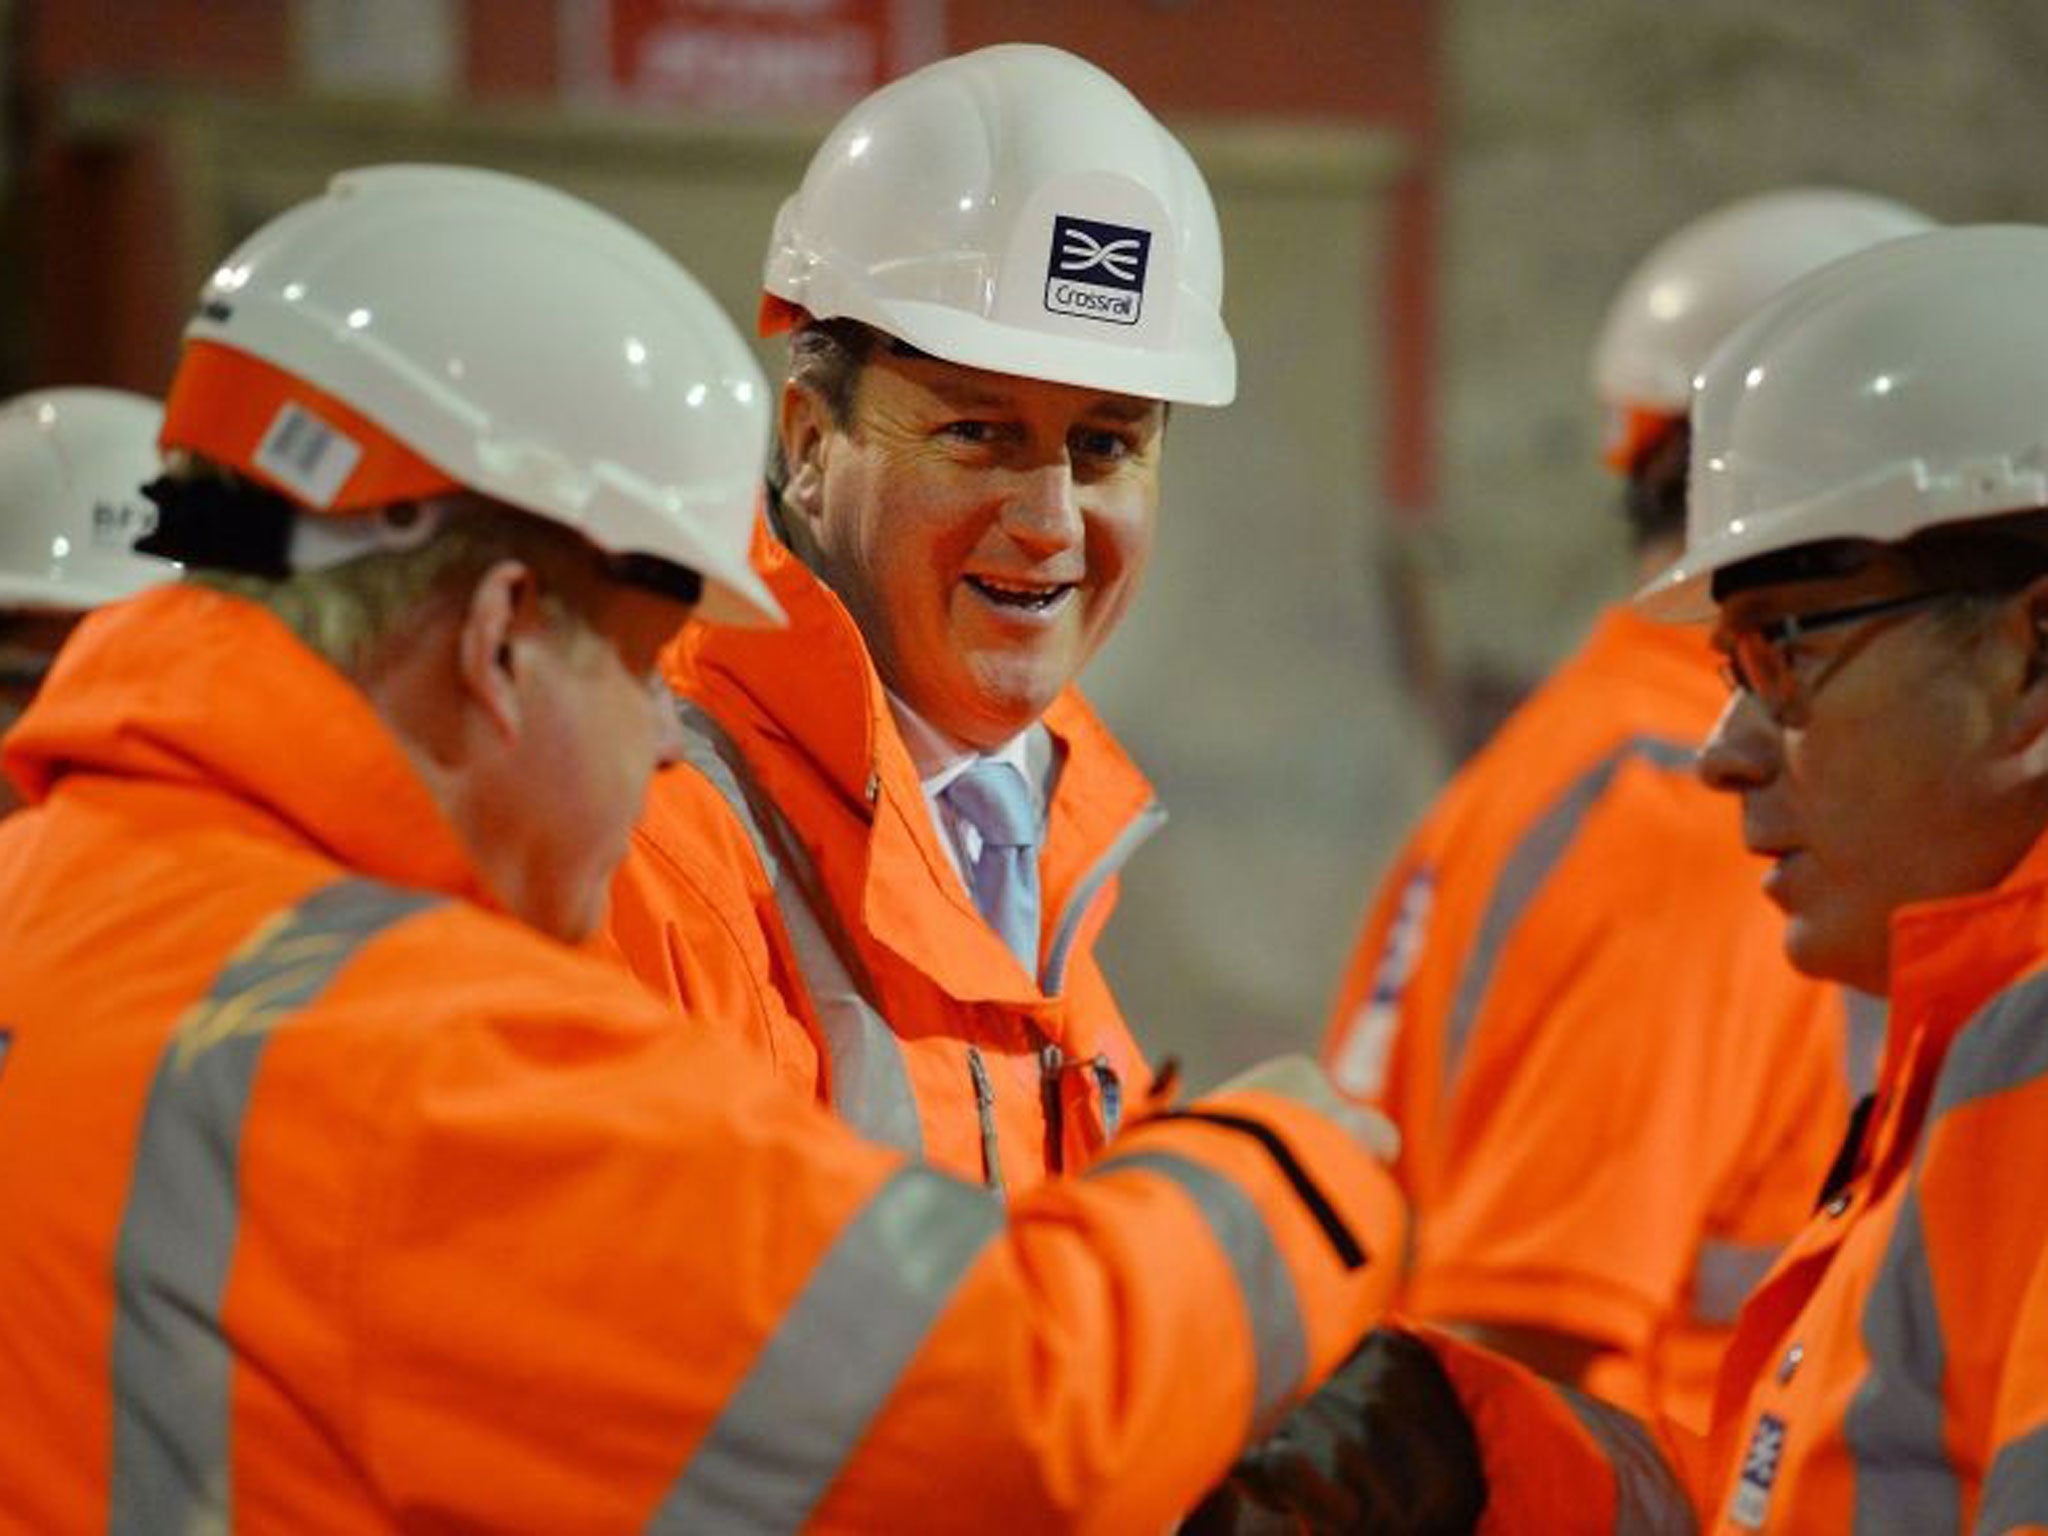 David Cameron smiles as he visits a Crossrail construction site underneath Tottenham Court Road